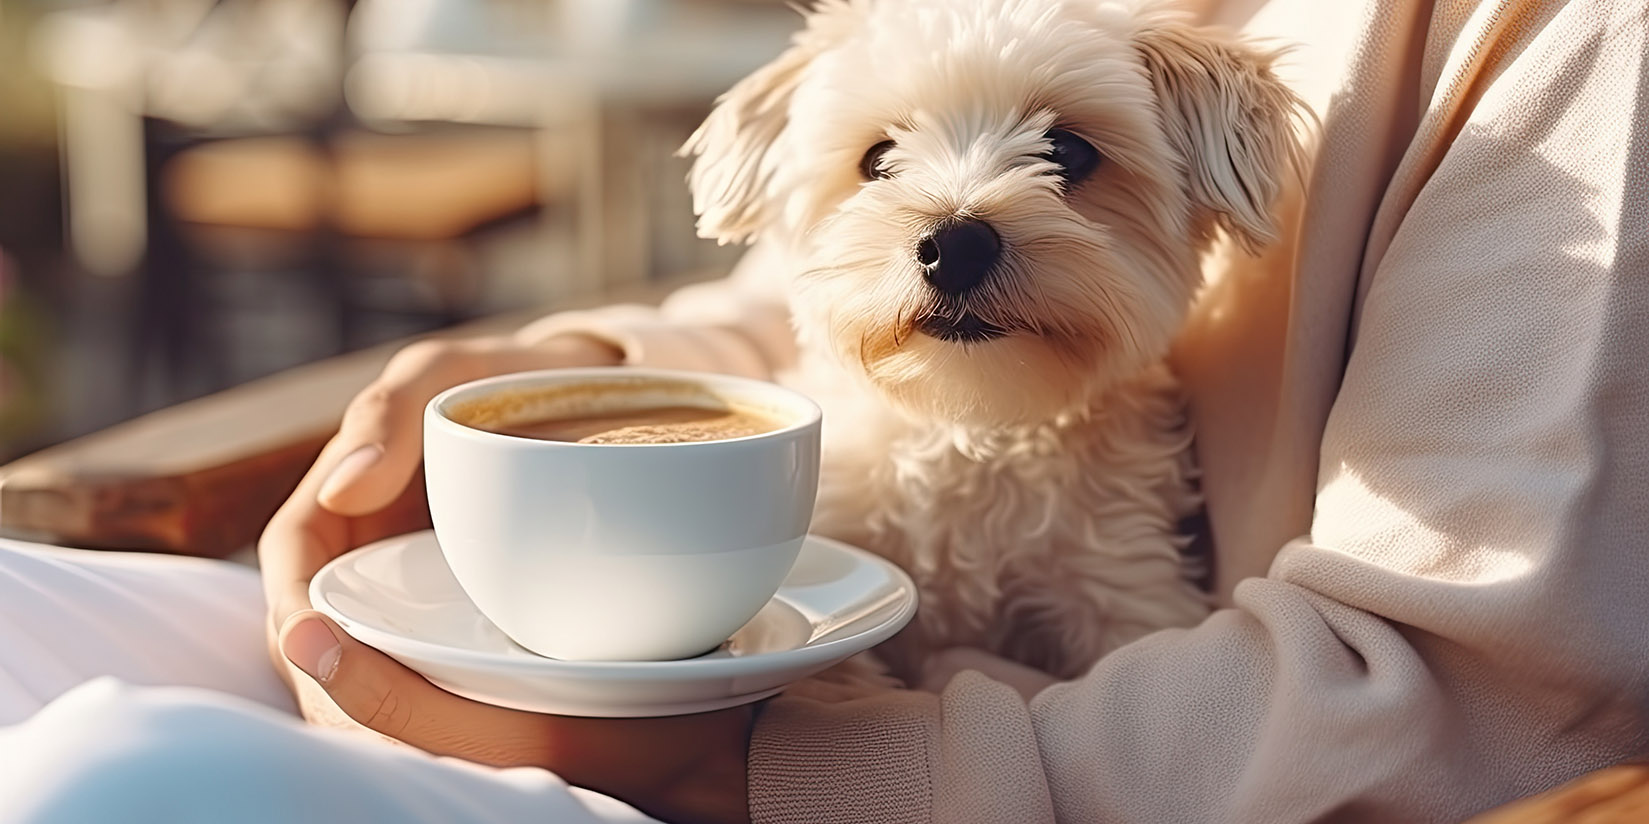 Fluffy white toy dog sitting on their owner's lap with coffee in hand.